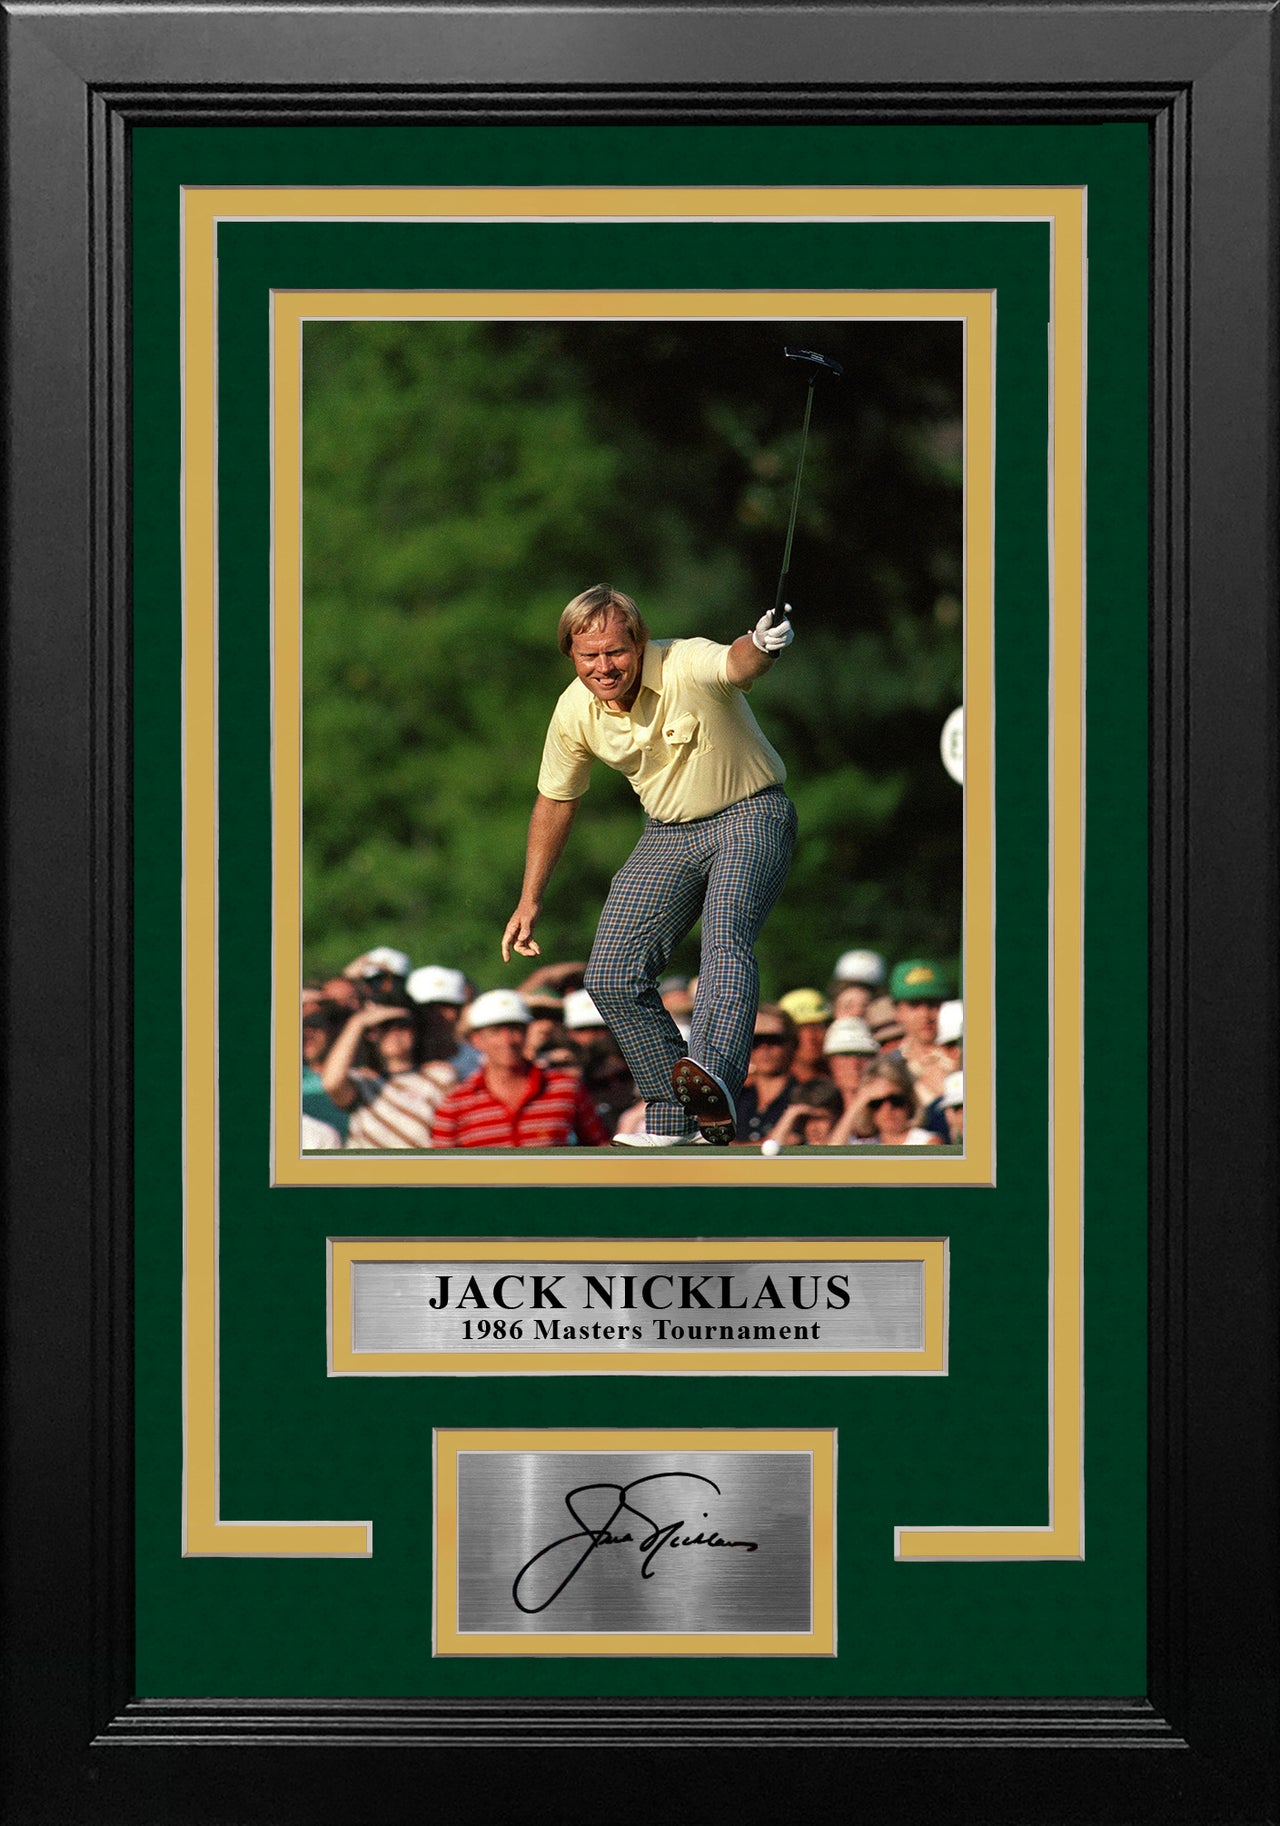 Jack Nicklaus 1986 Masters Tournament Putt 8" x 10" Framed Golf Photo with Engraved Autograph - Dynasty Sports & Framing 